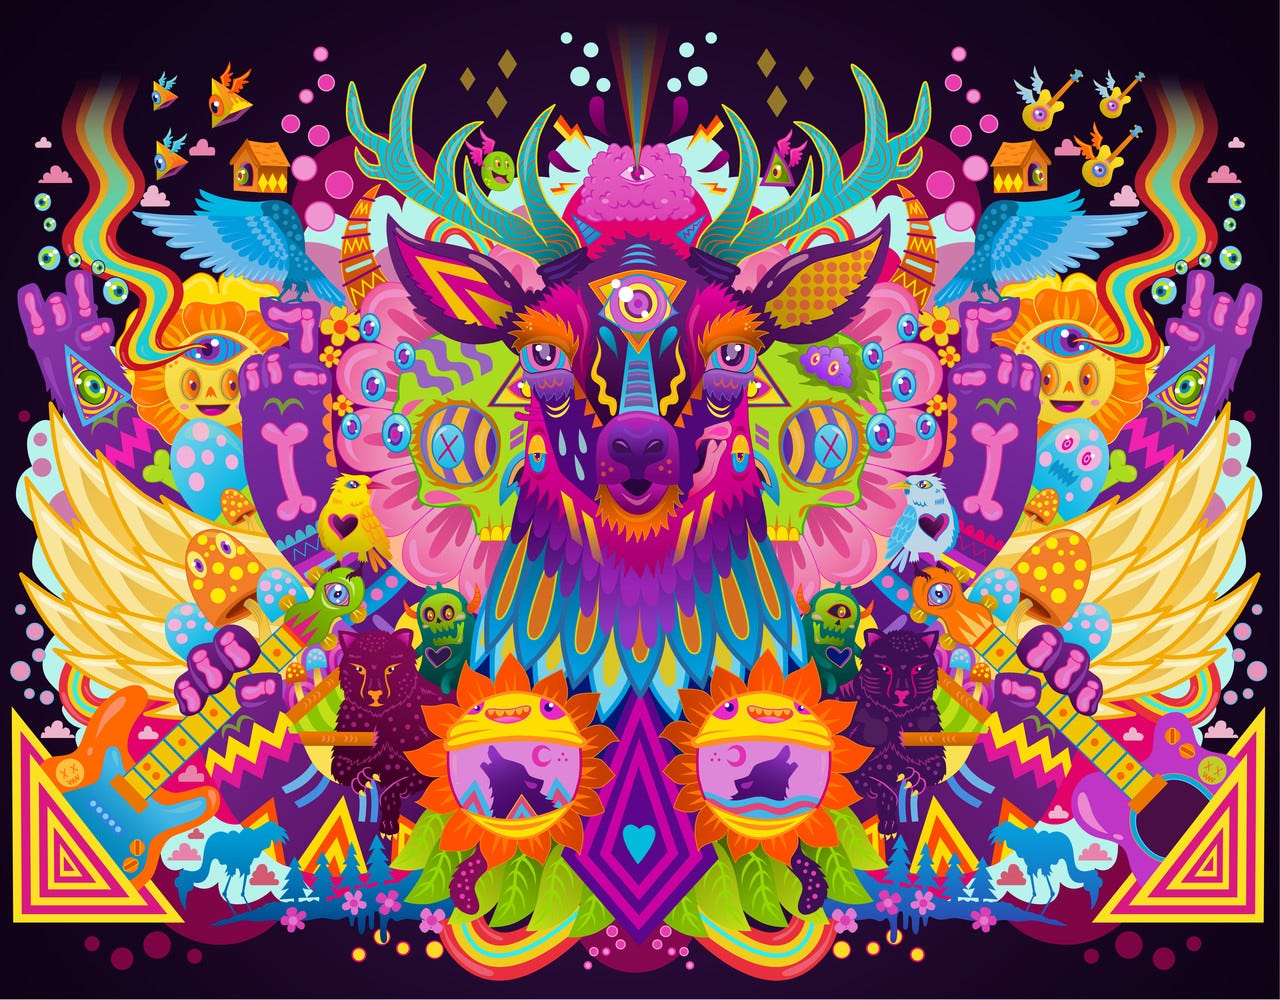  Bright, colourful illustration of a stag surrounded by bears, mushrooms, flowers etc